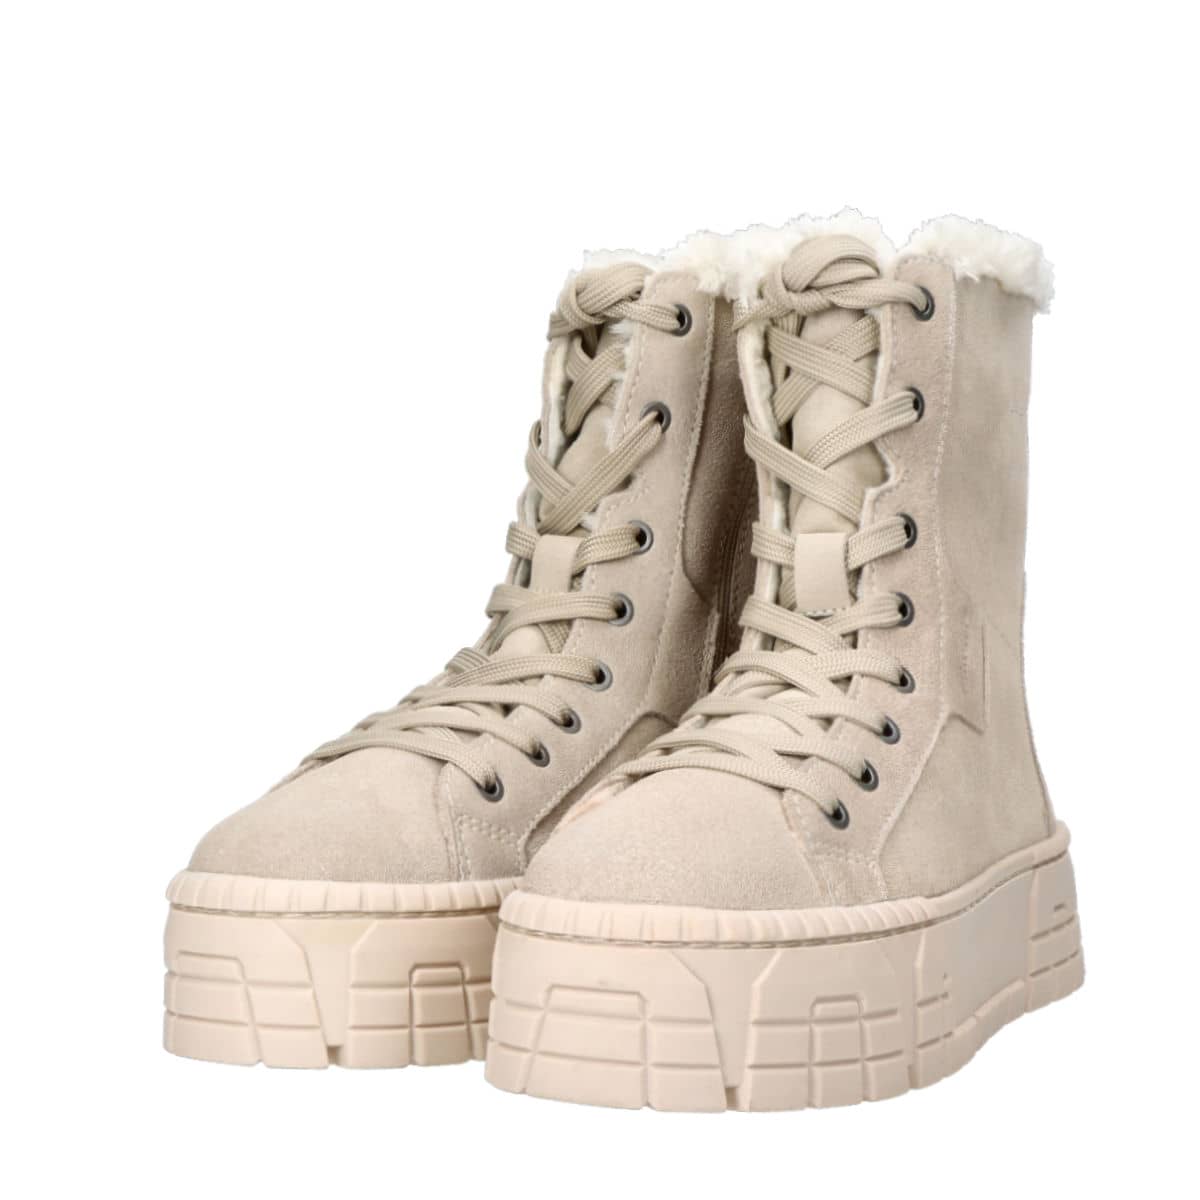 women's suede ankle with zipper - beige | Robel.shoes